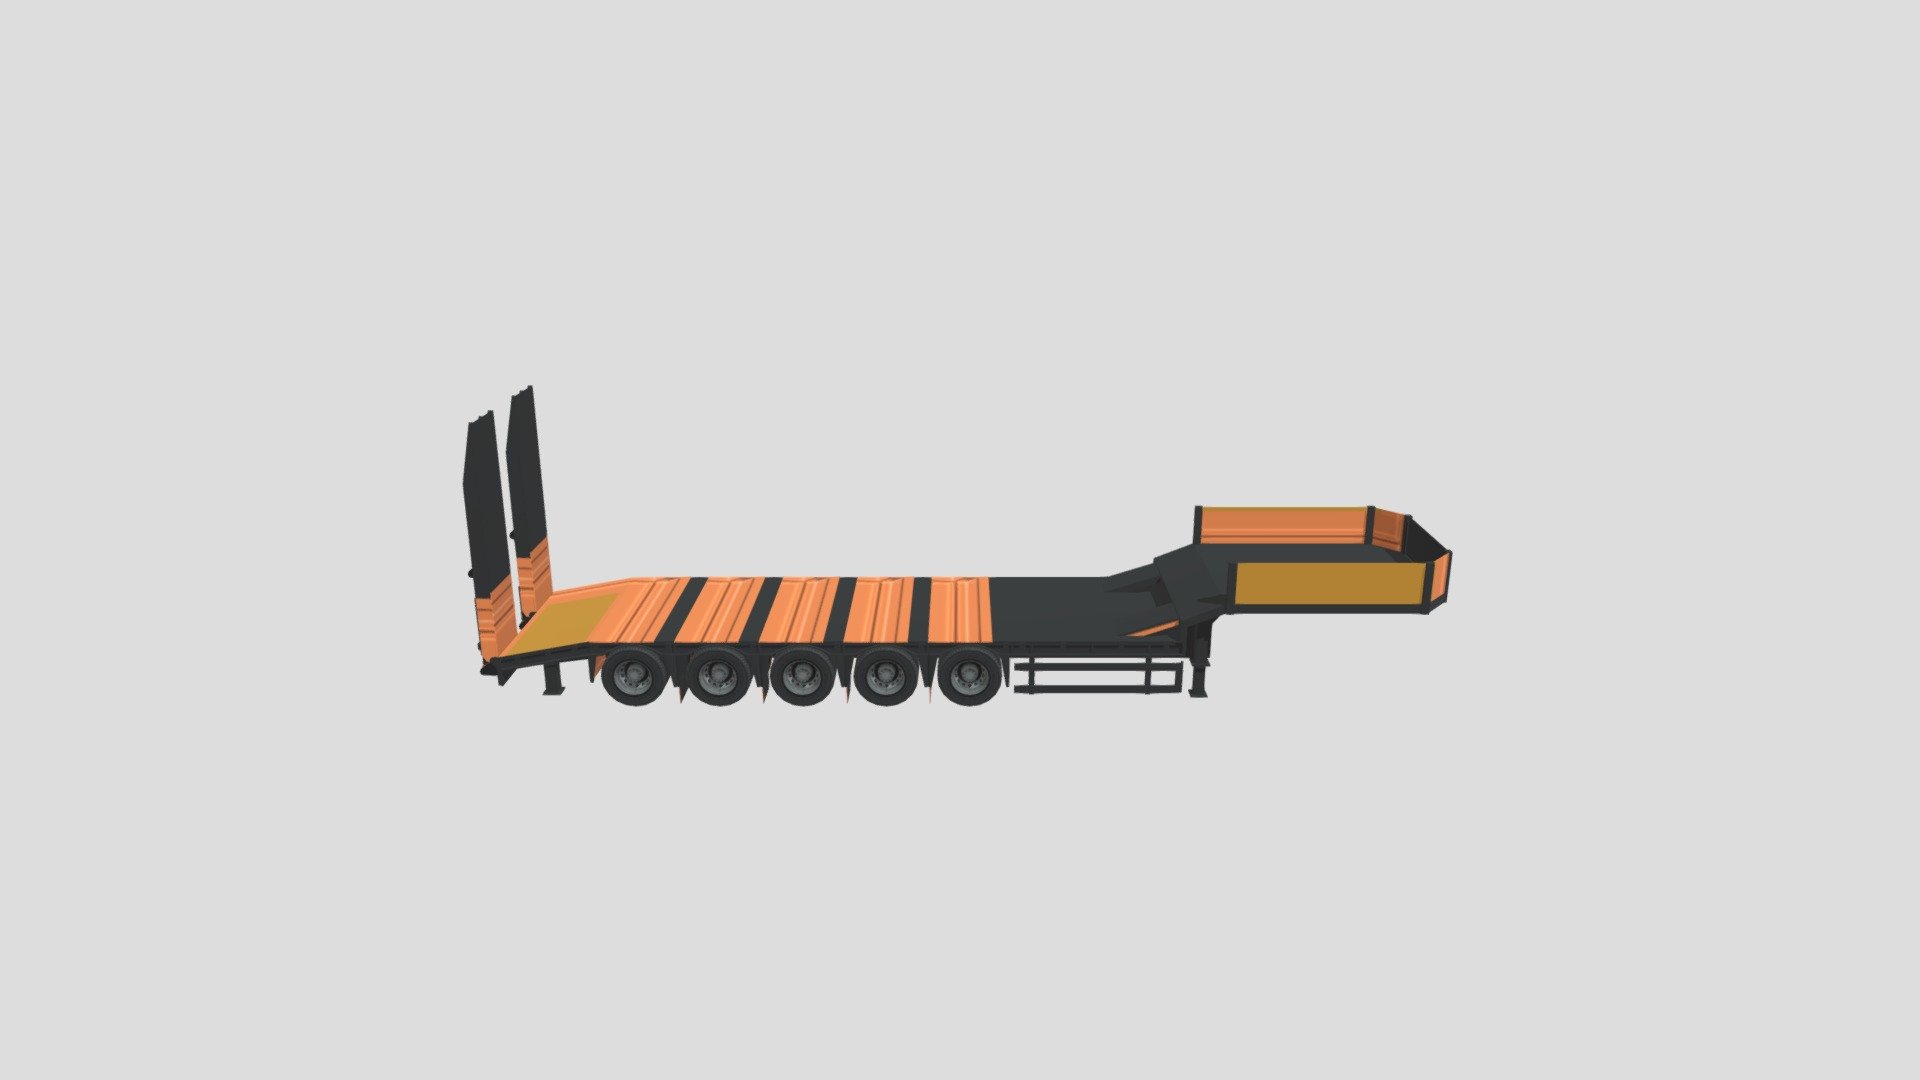 Low loader trailer model. You can use it as active or background asset in game 3d model